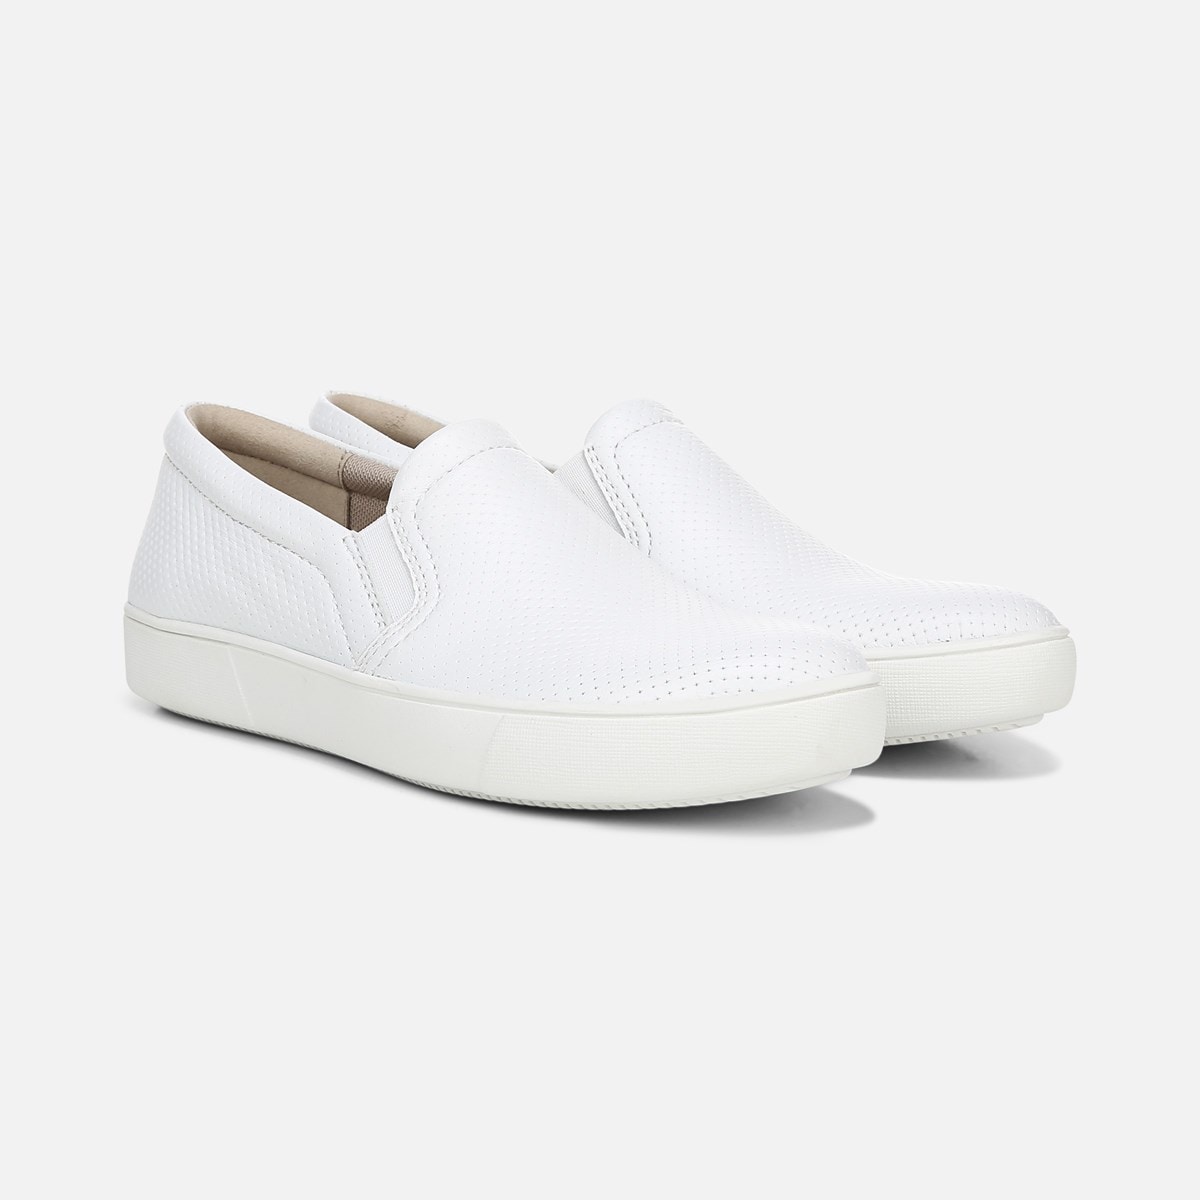 white perforated leather sneakers